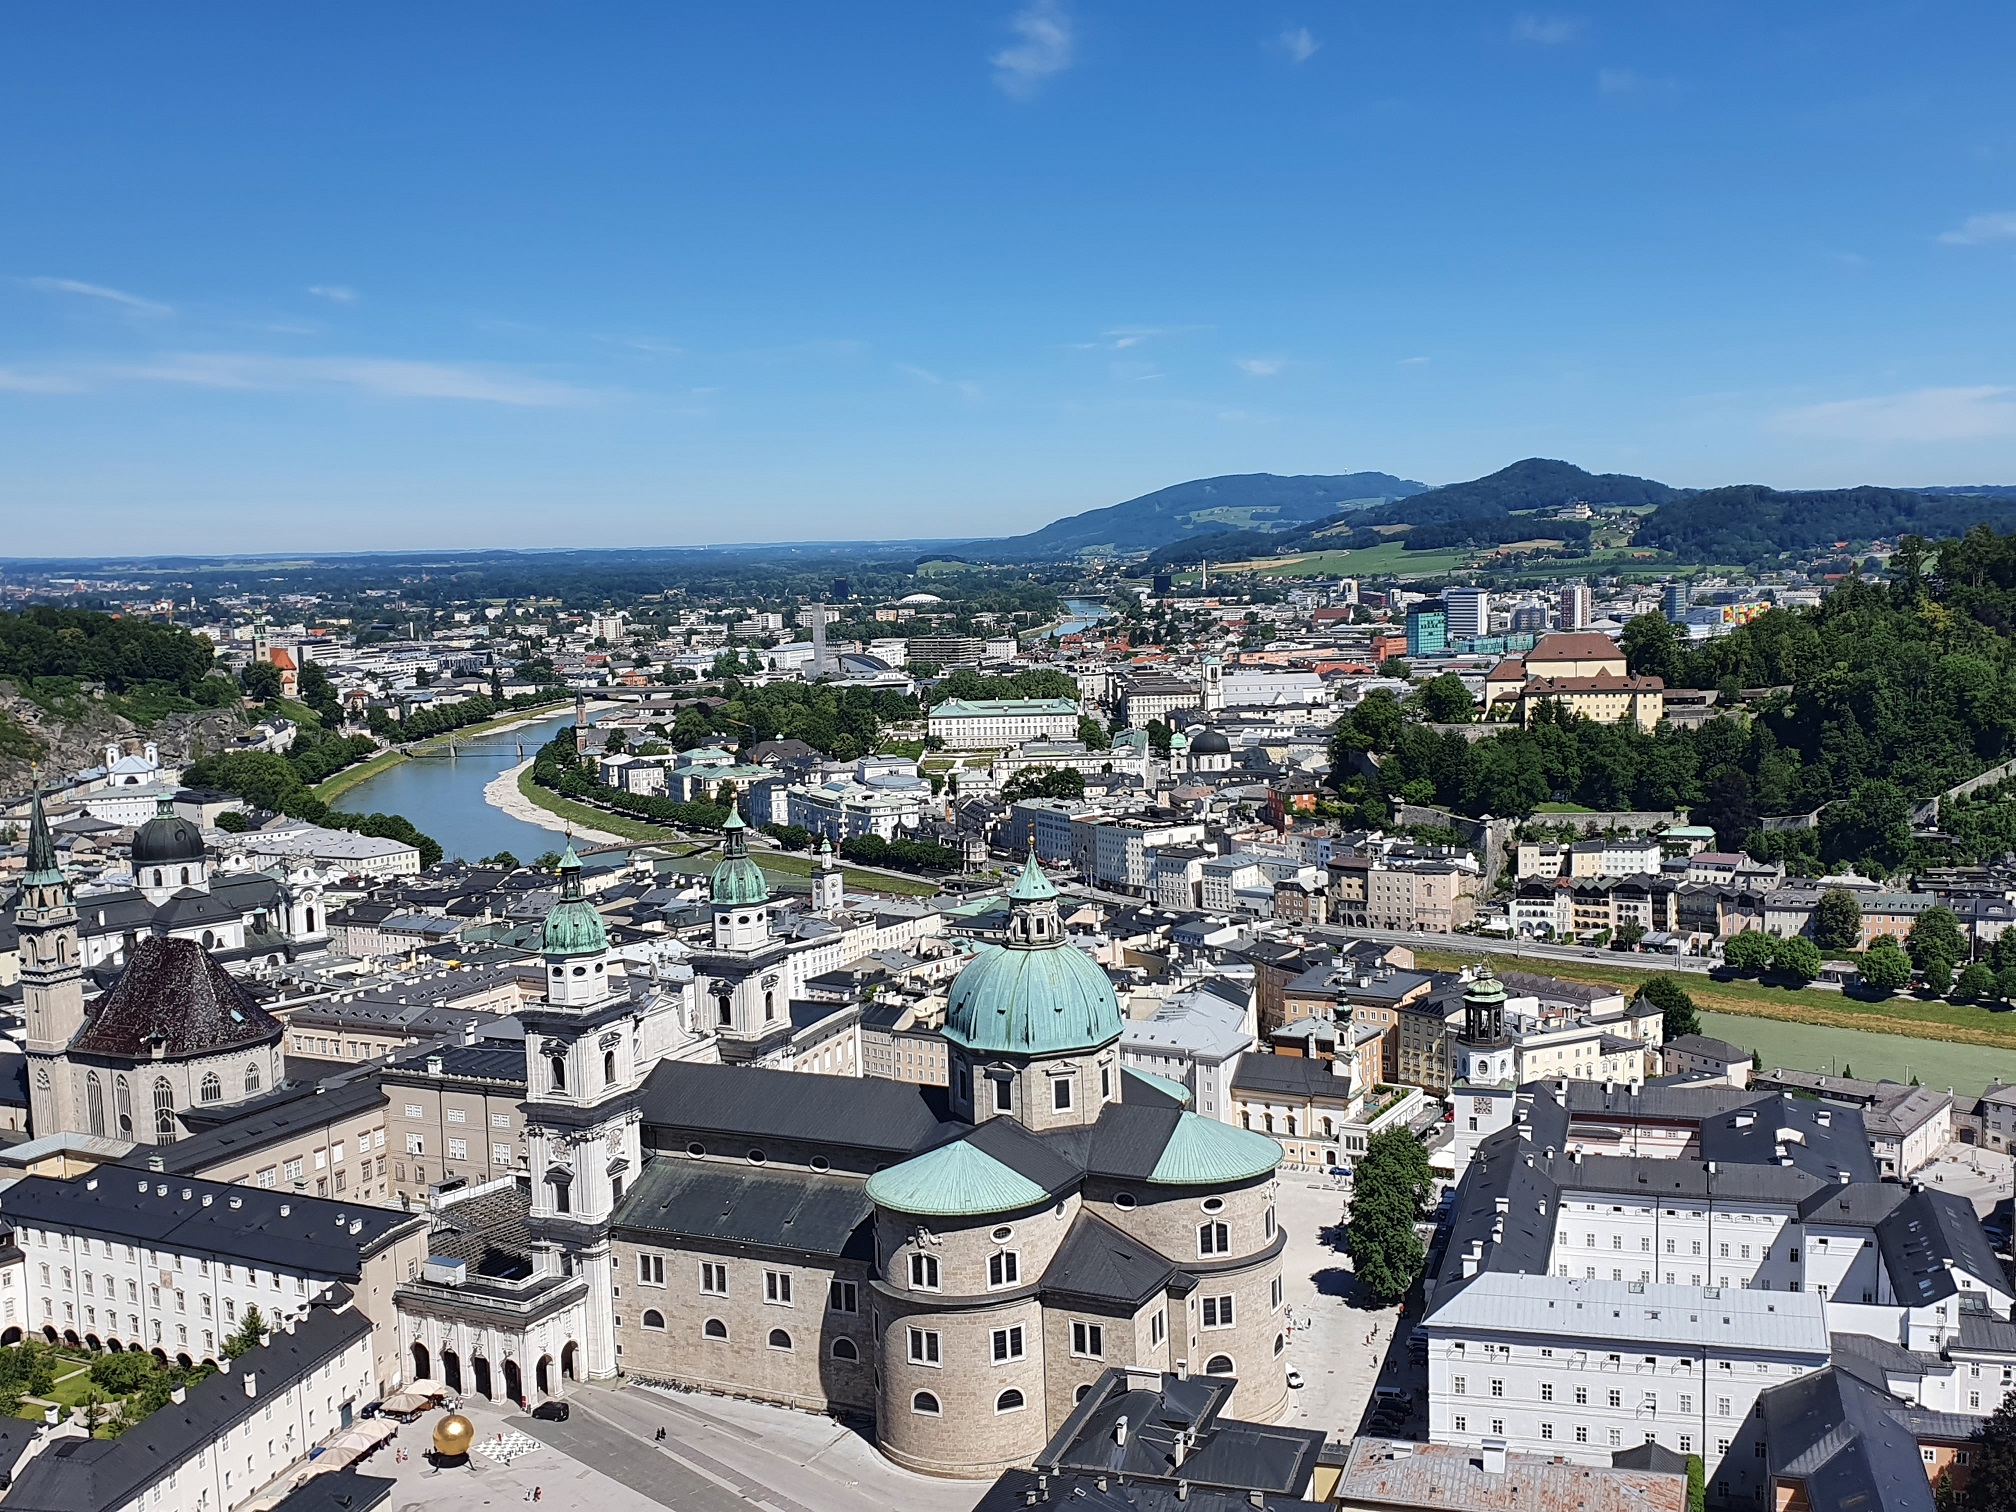 Sound of Music City Salzburg: What to do, what to see